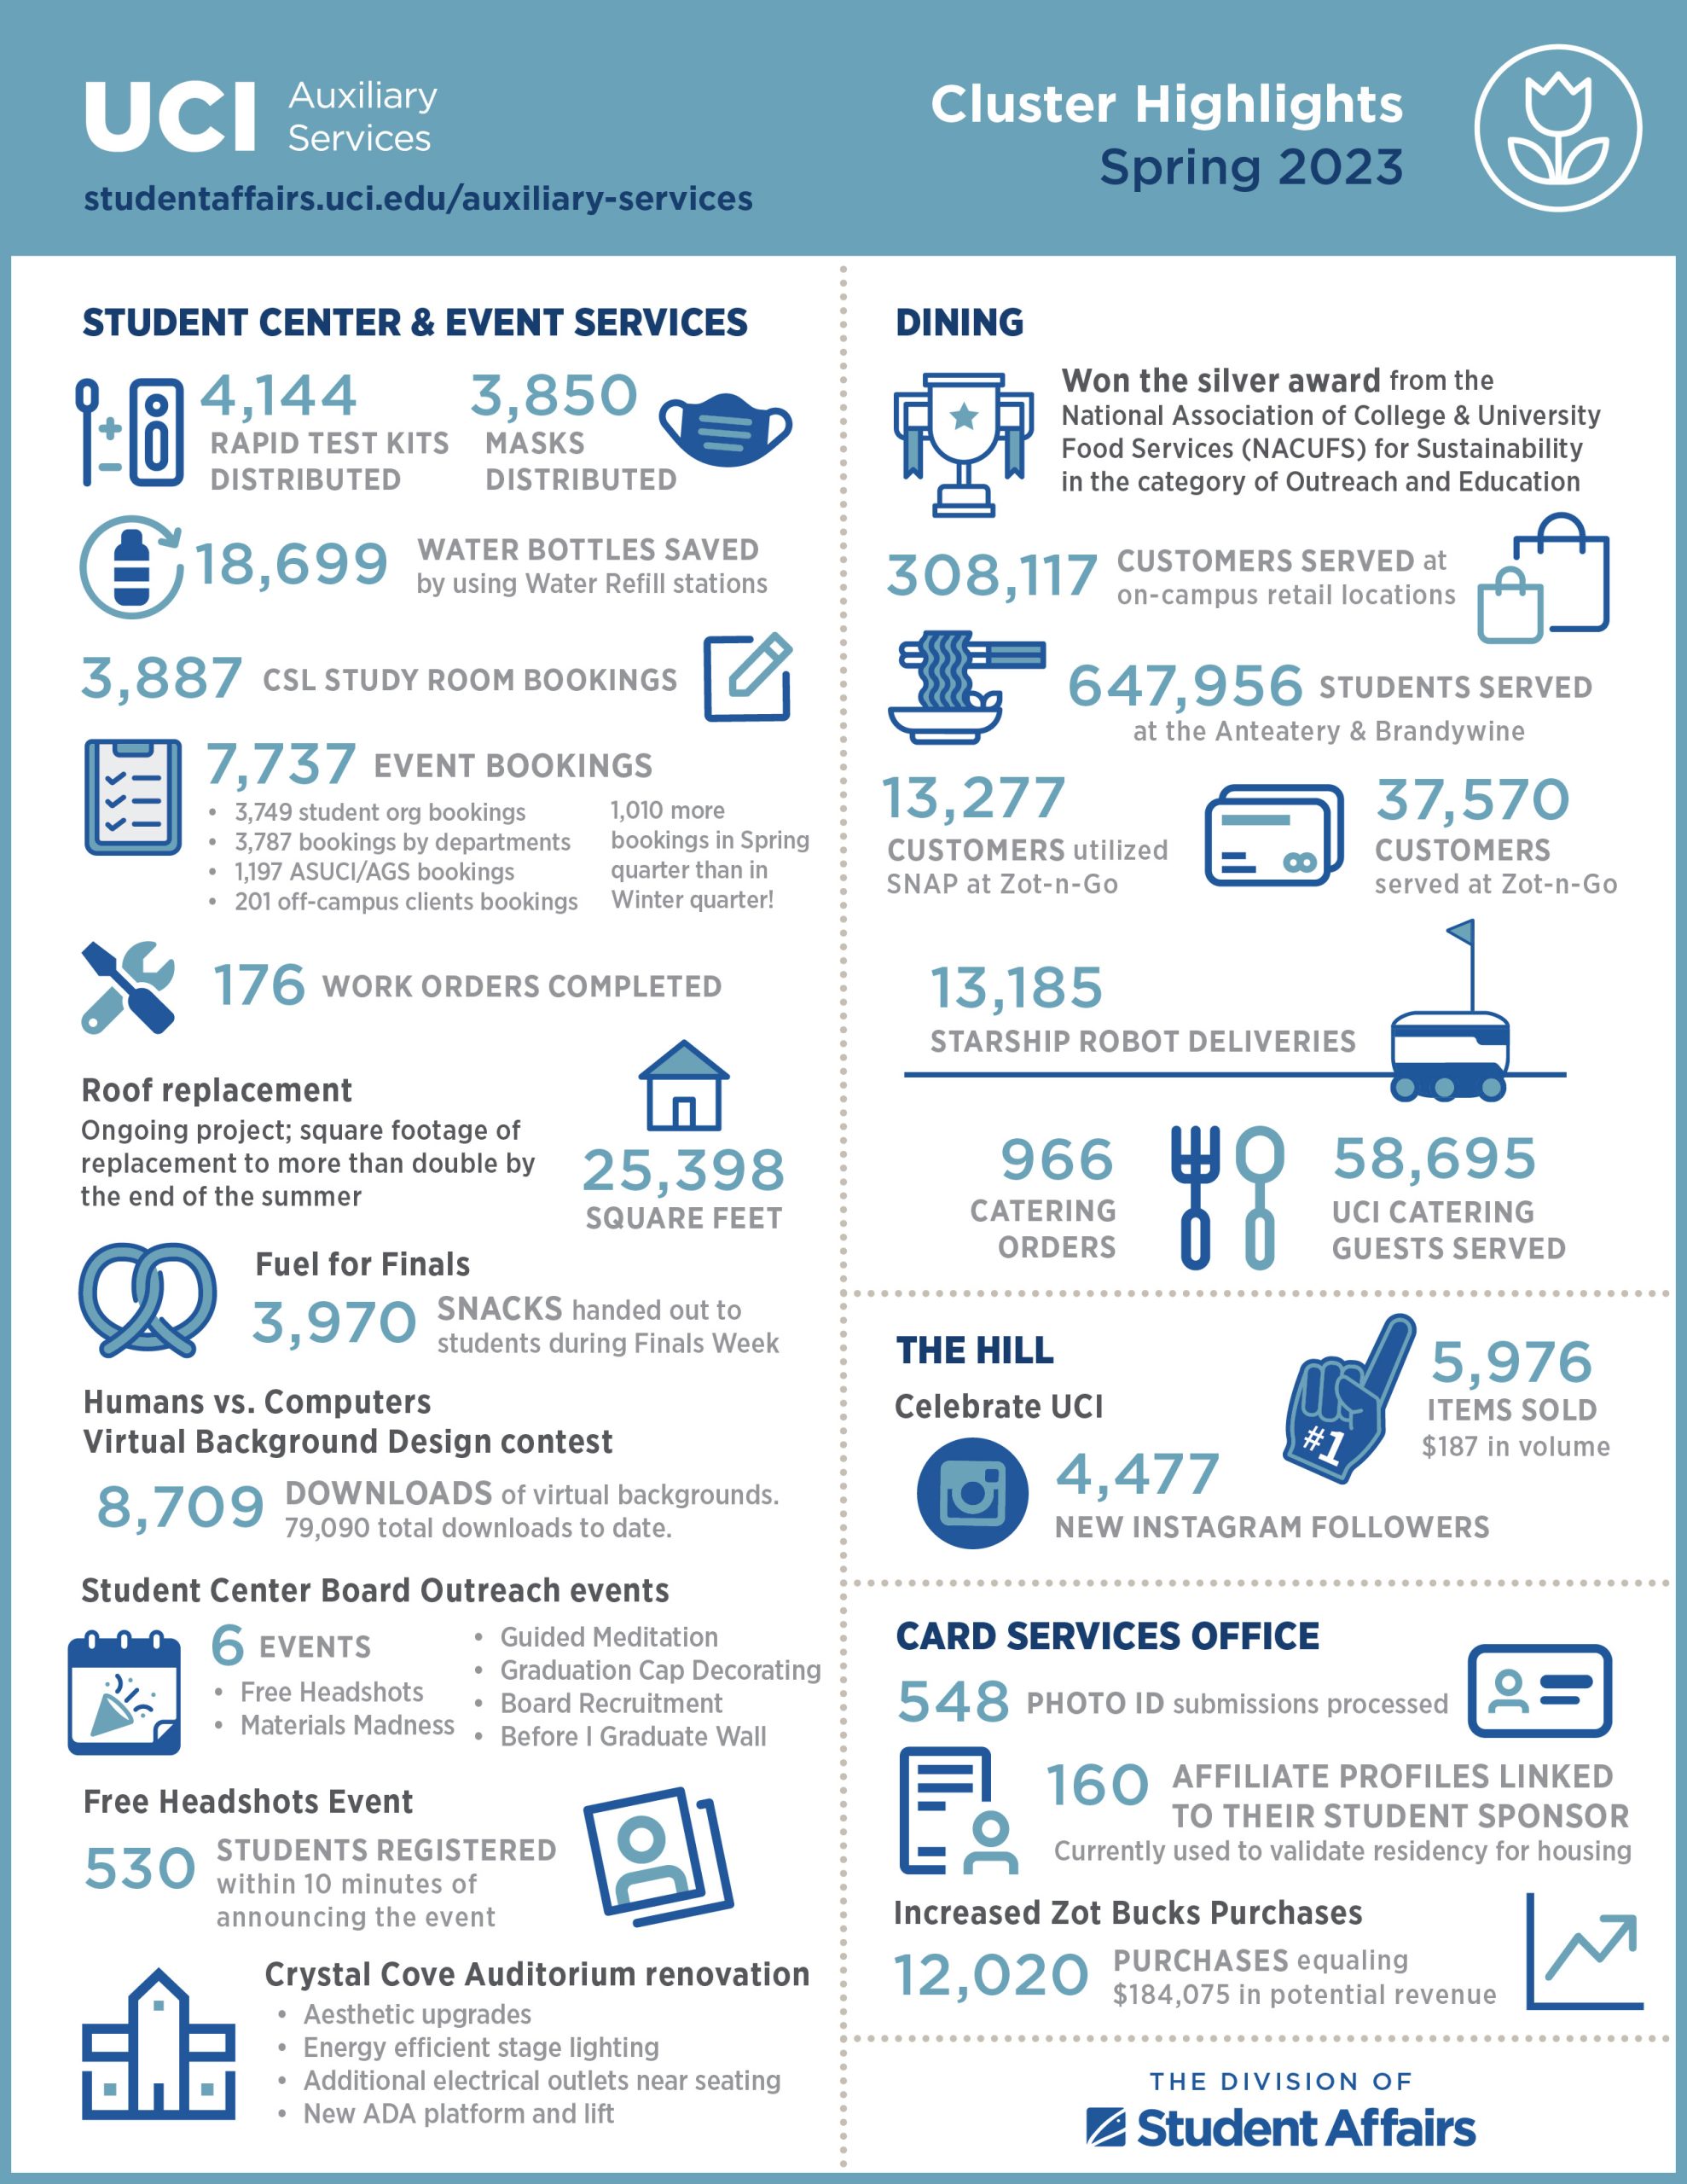 Student Affairs Auxiliary Services Spring 2023 Cluster Highlights